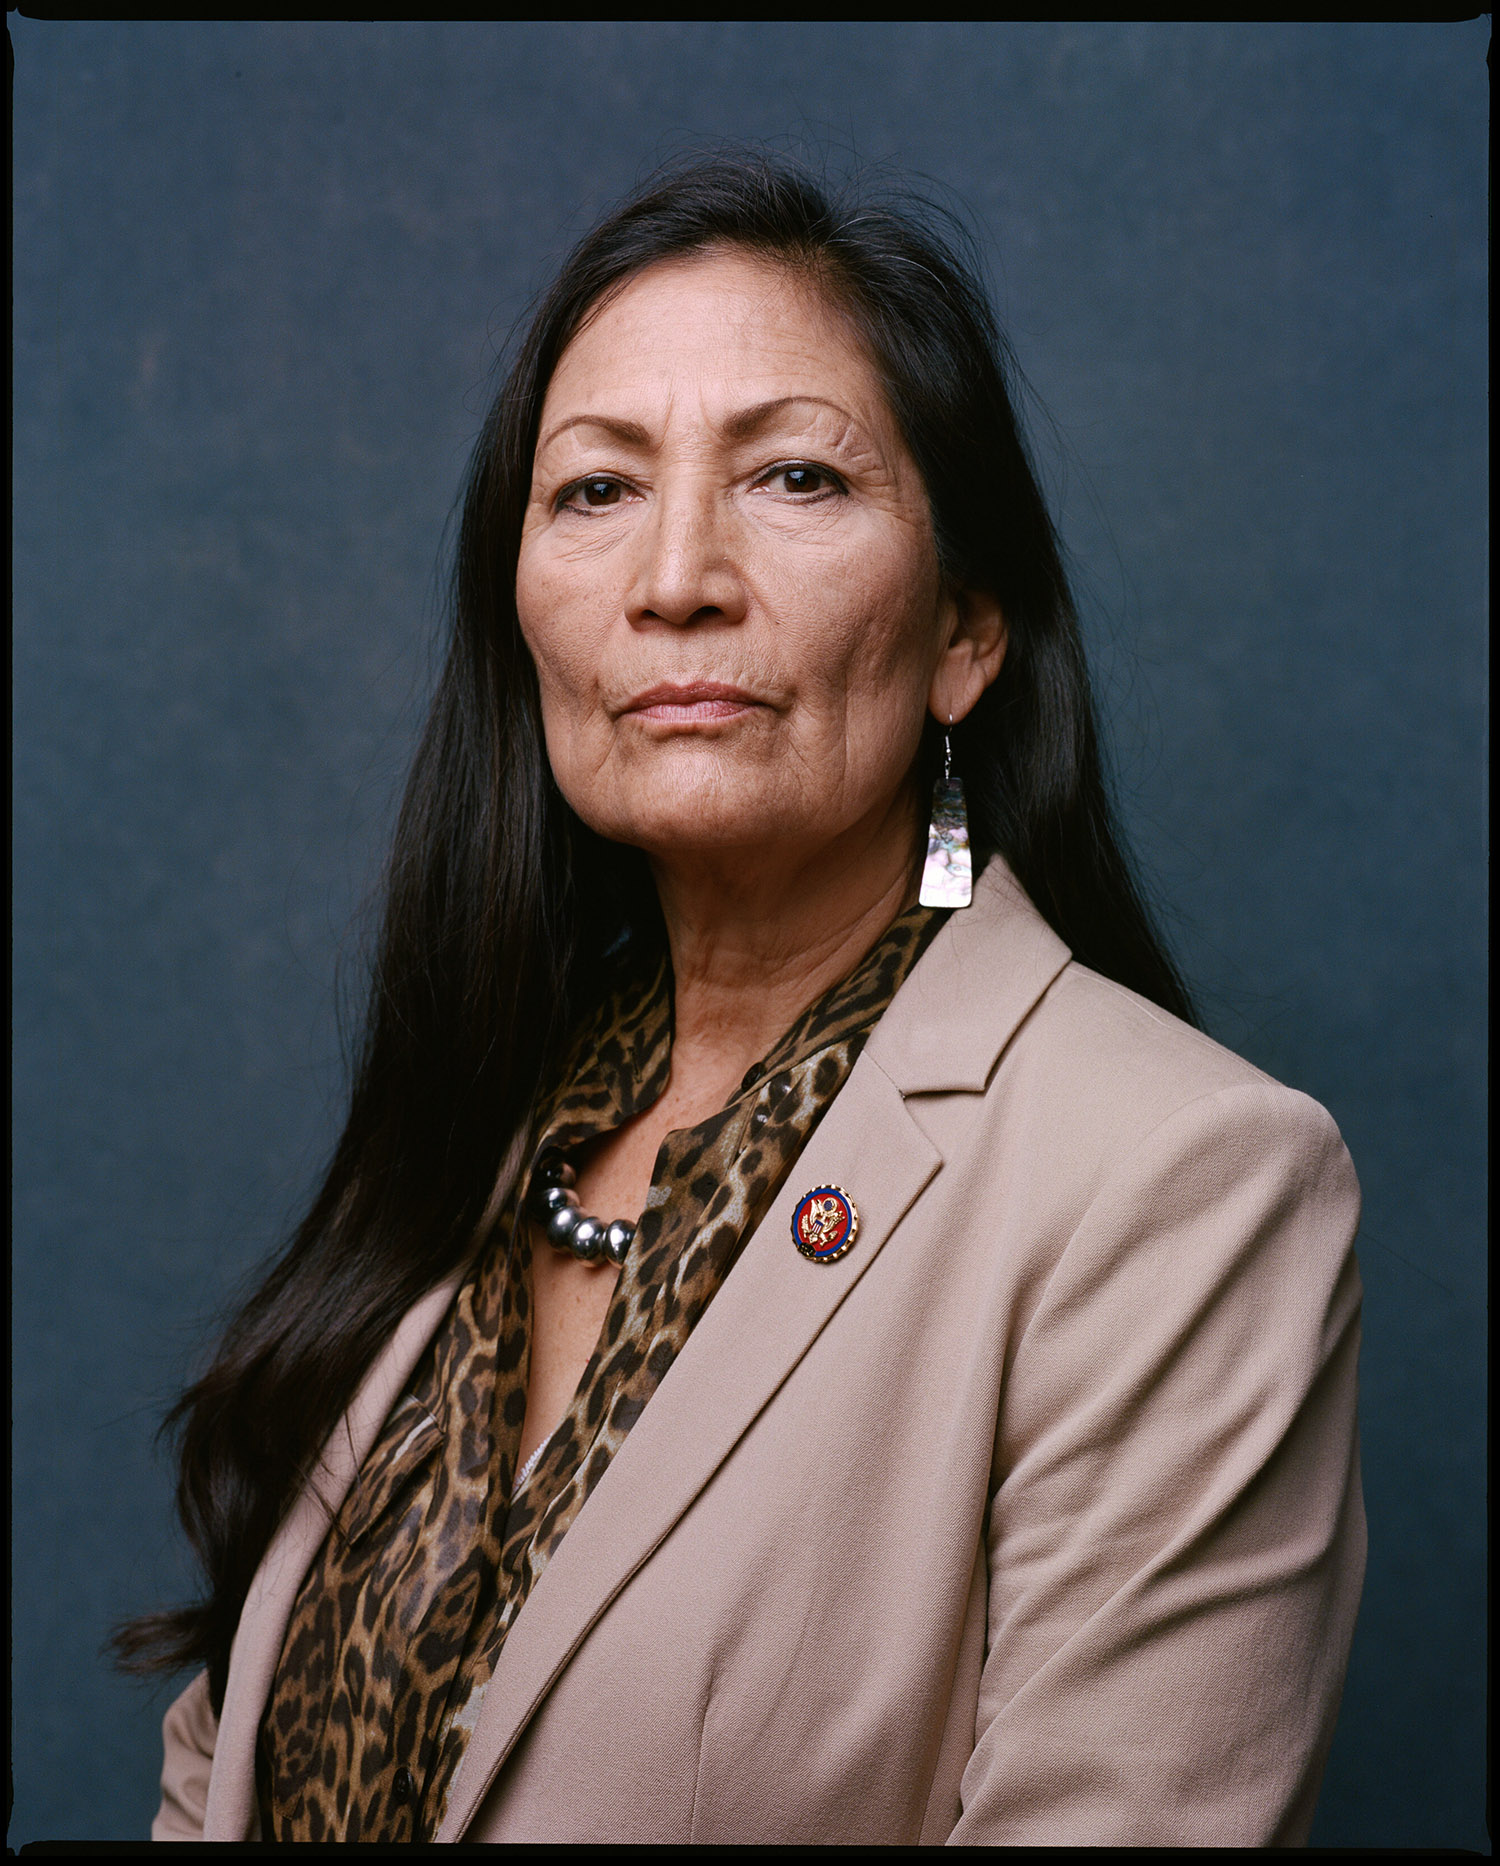  ***HOLD FOR WOMEN IN CONGRESS PROJECT, CONTACT MARISA SCHWARTZ TAYLOR*** Deb Haaland

Credit: Celeste Sloman for The New York Times                              NYTCREDIT: Celeste Sloman for The New York Times 